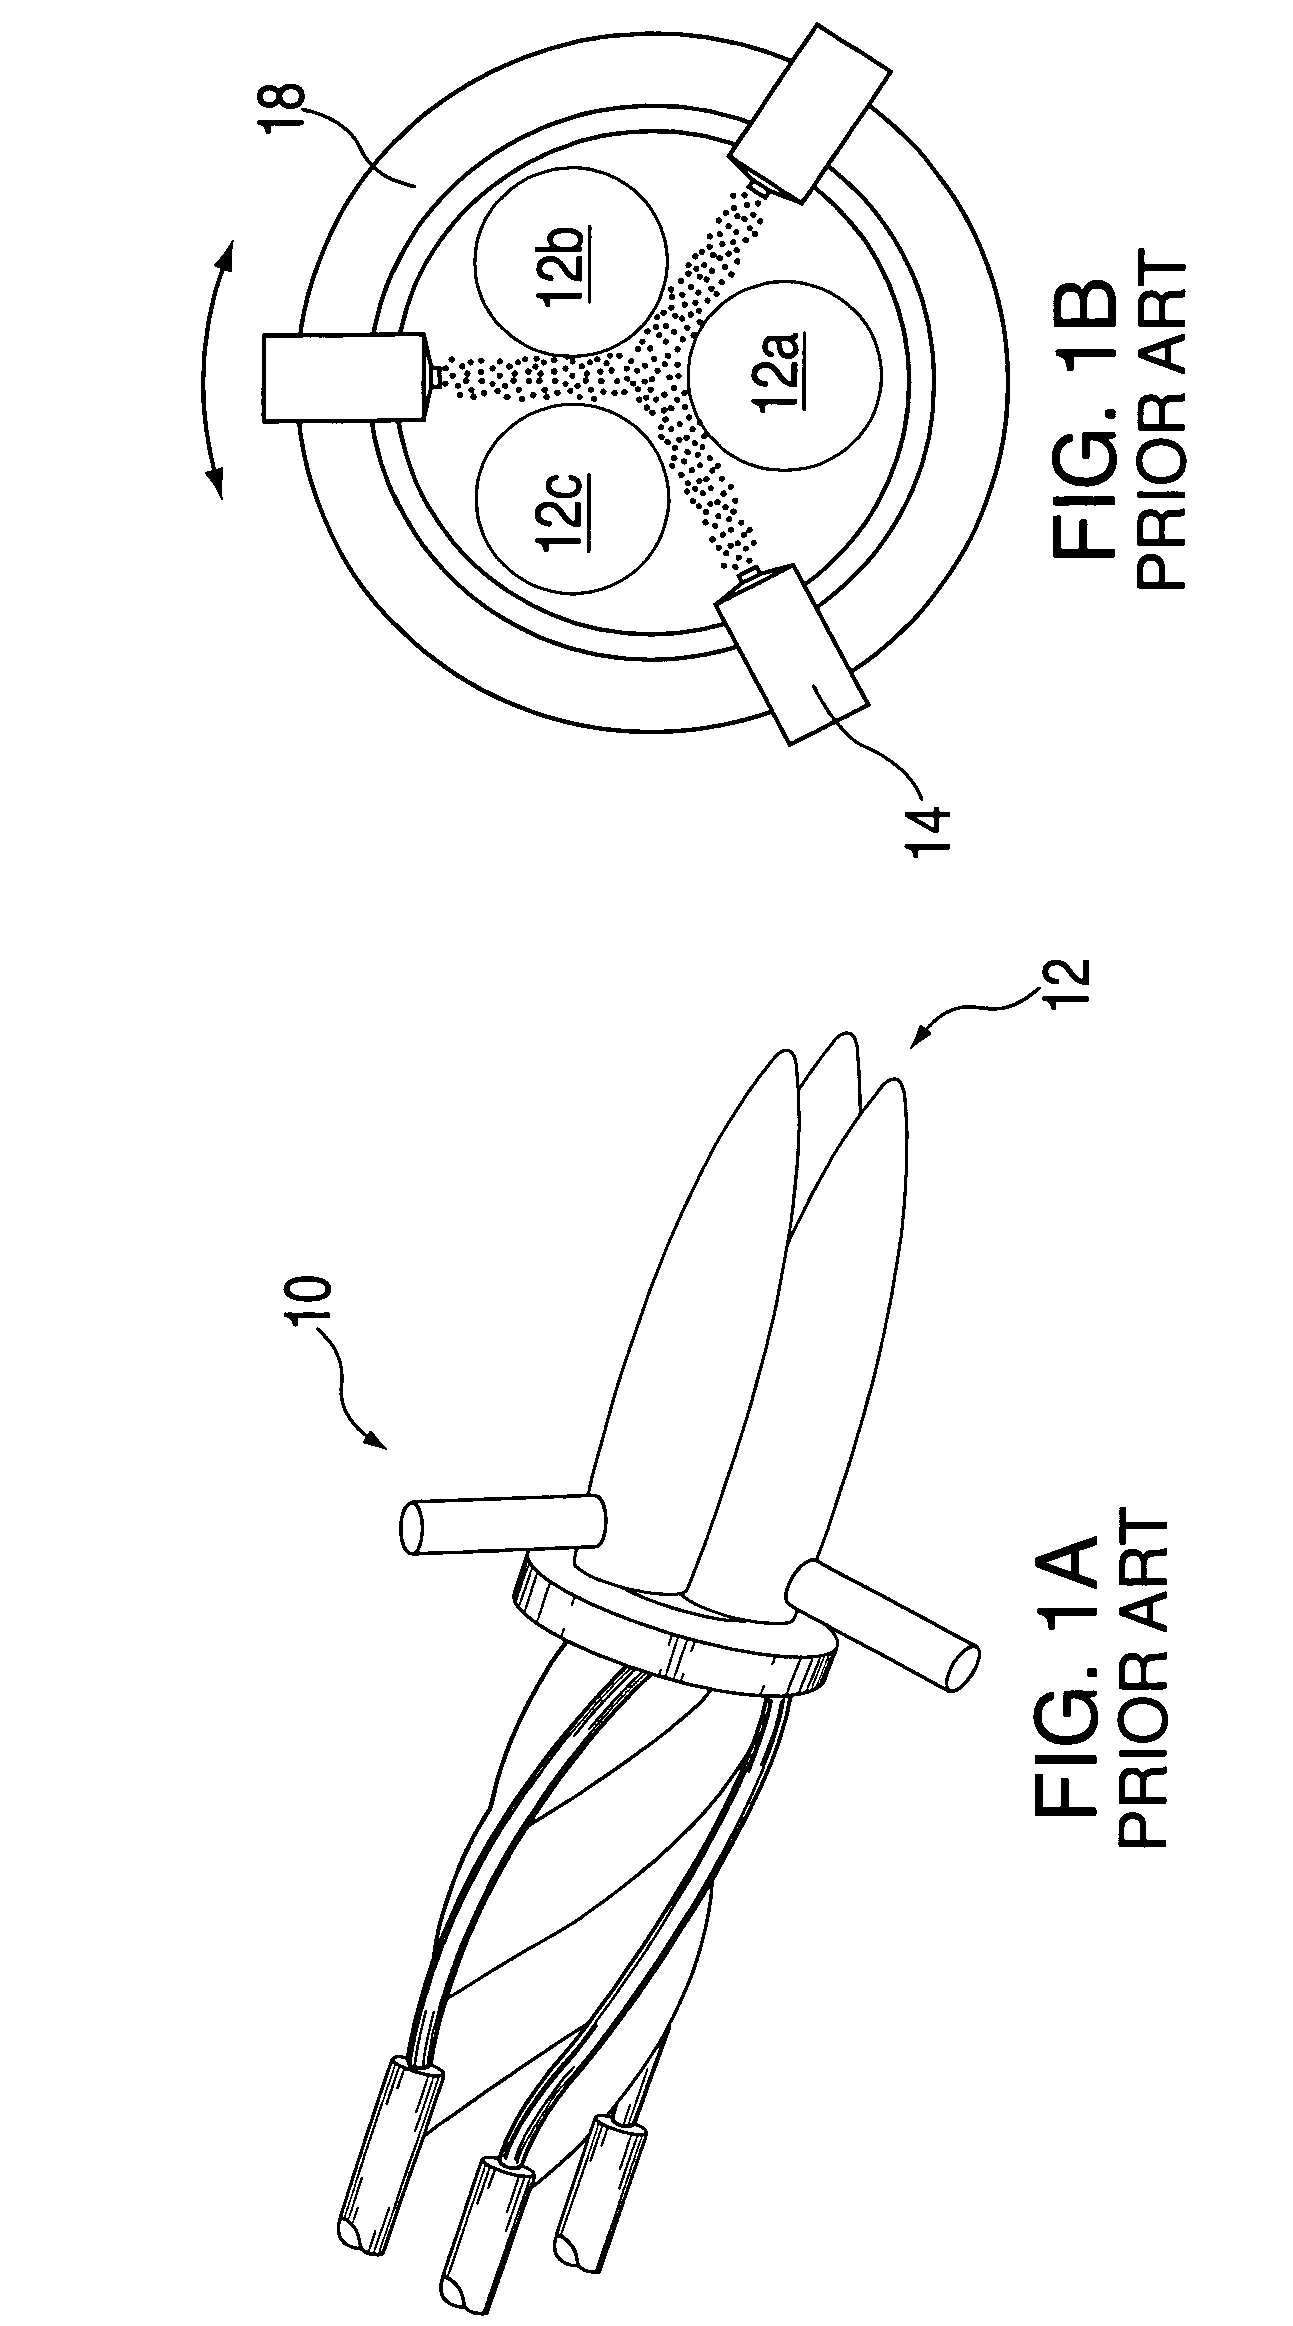 Method of fixing anodic arc attachments of a multiple arc plasma gun and nozzle device for same